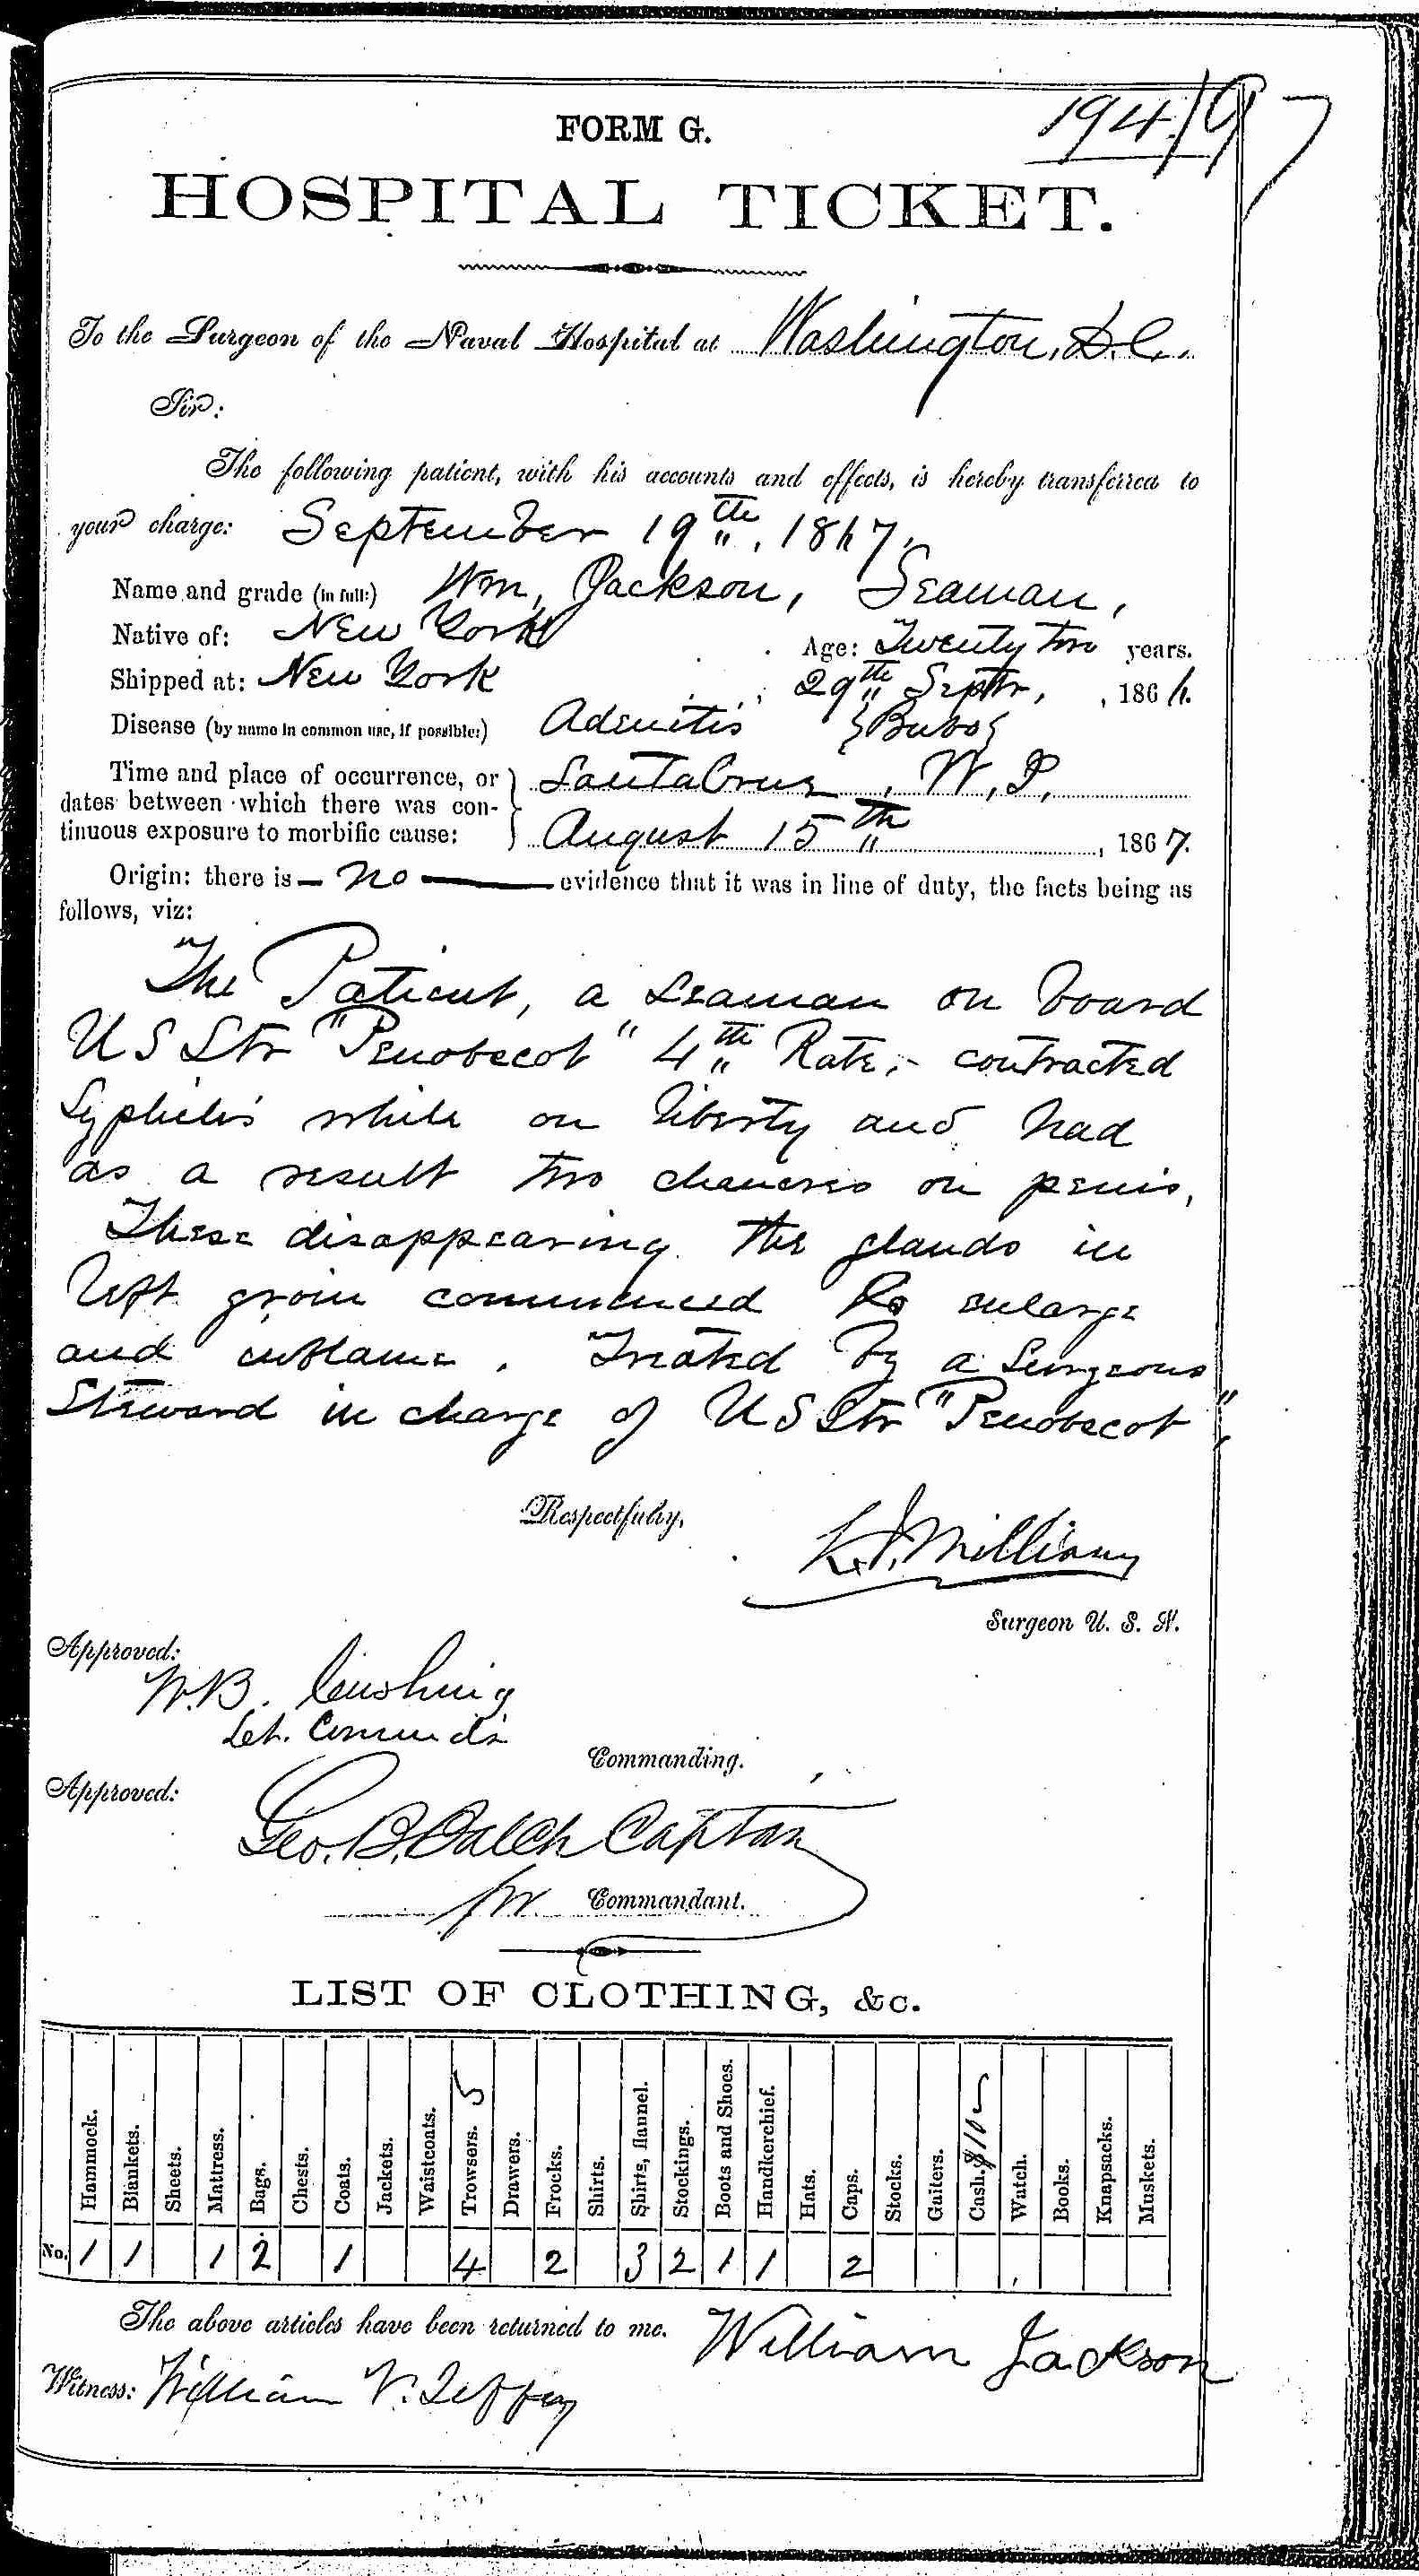 Entry for William Jackson (first admission page 1 of 2) in the log Hospital Tickets and Case Papers - Naval Hospital - Washington, D.C. - 1866-68